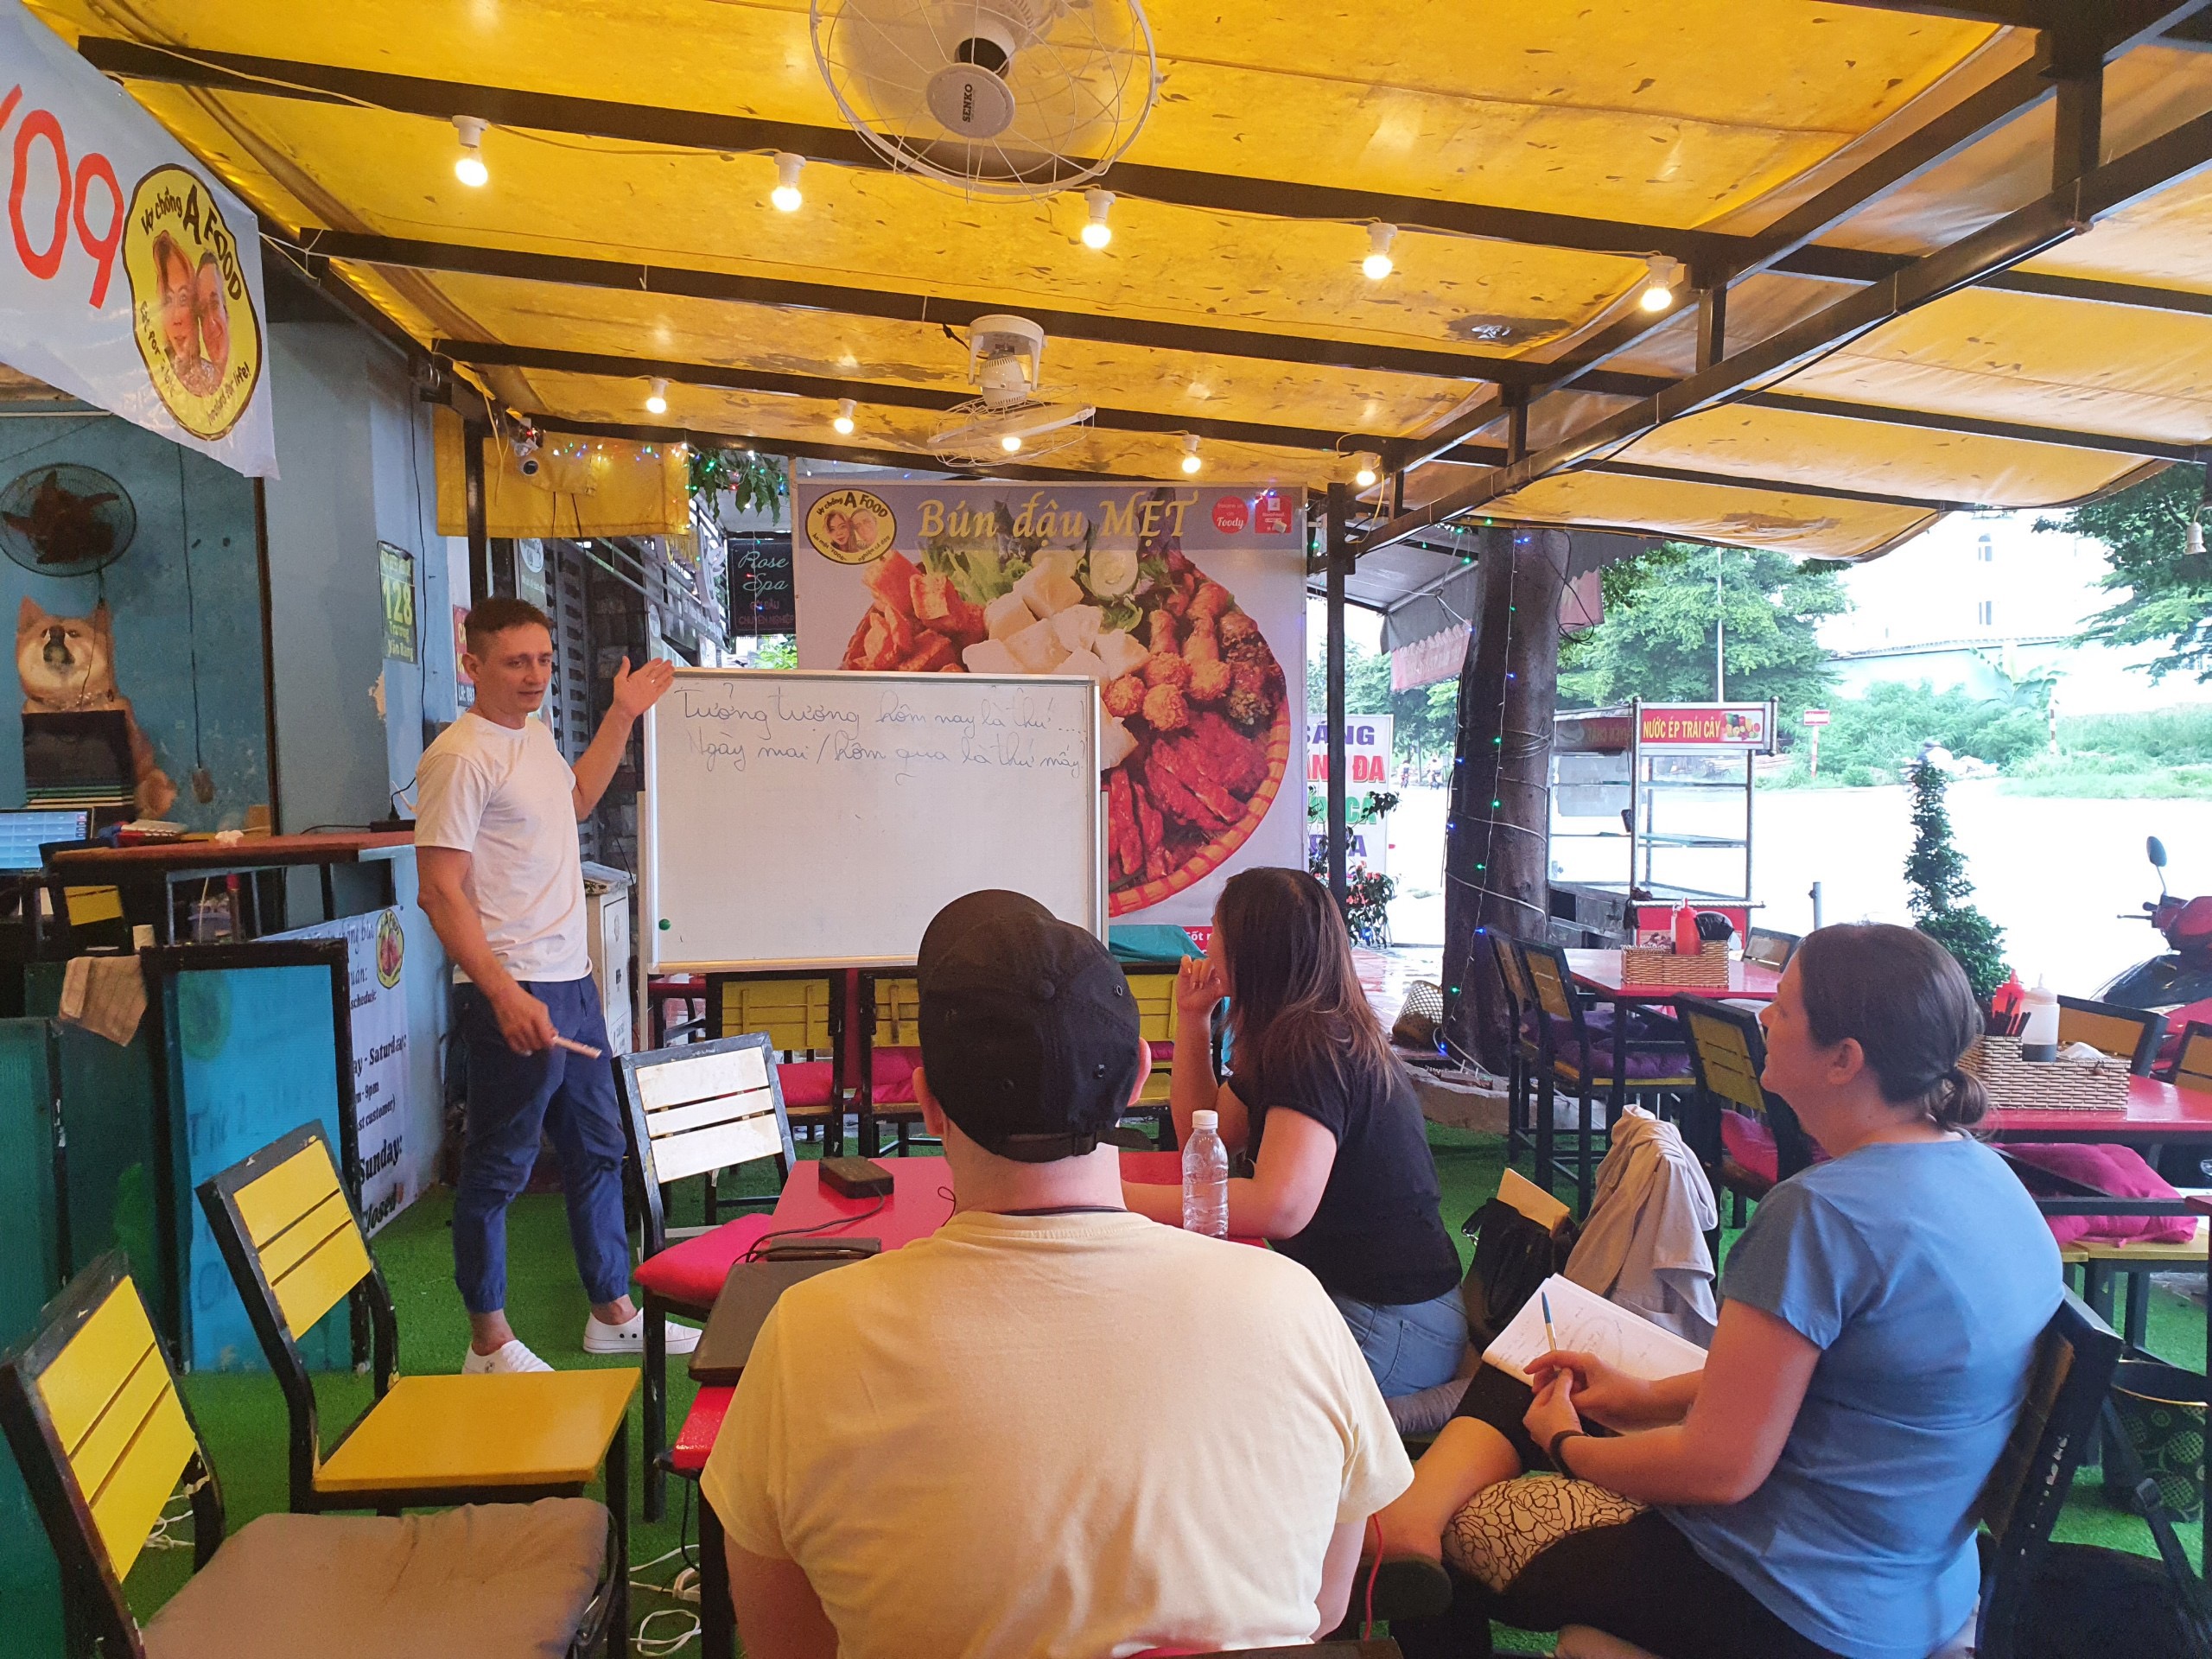 Valentin Constantinescu is seen teaching English for foreigners in Vietnam in this supplied photo.